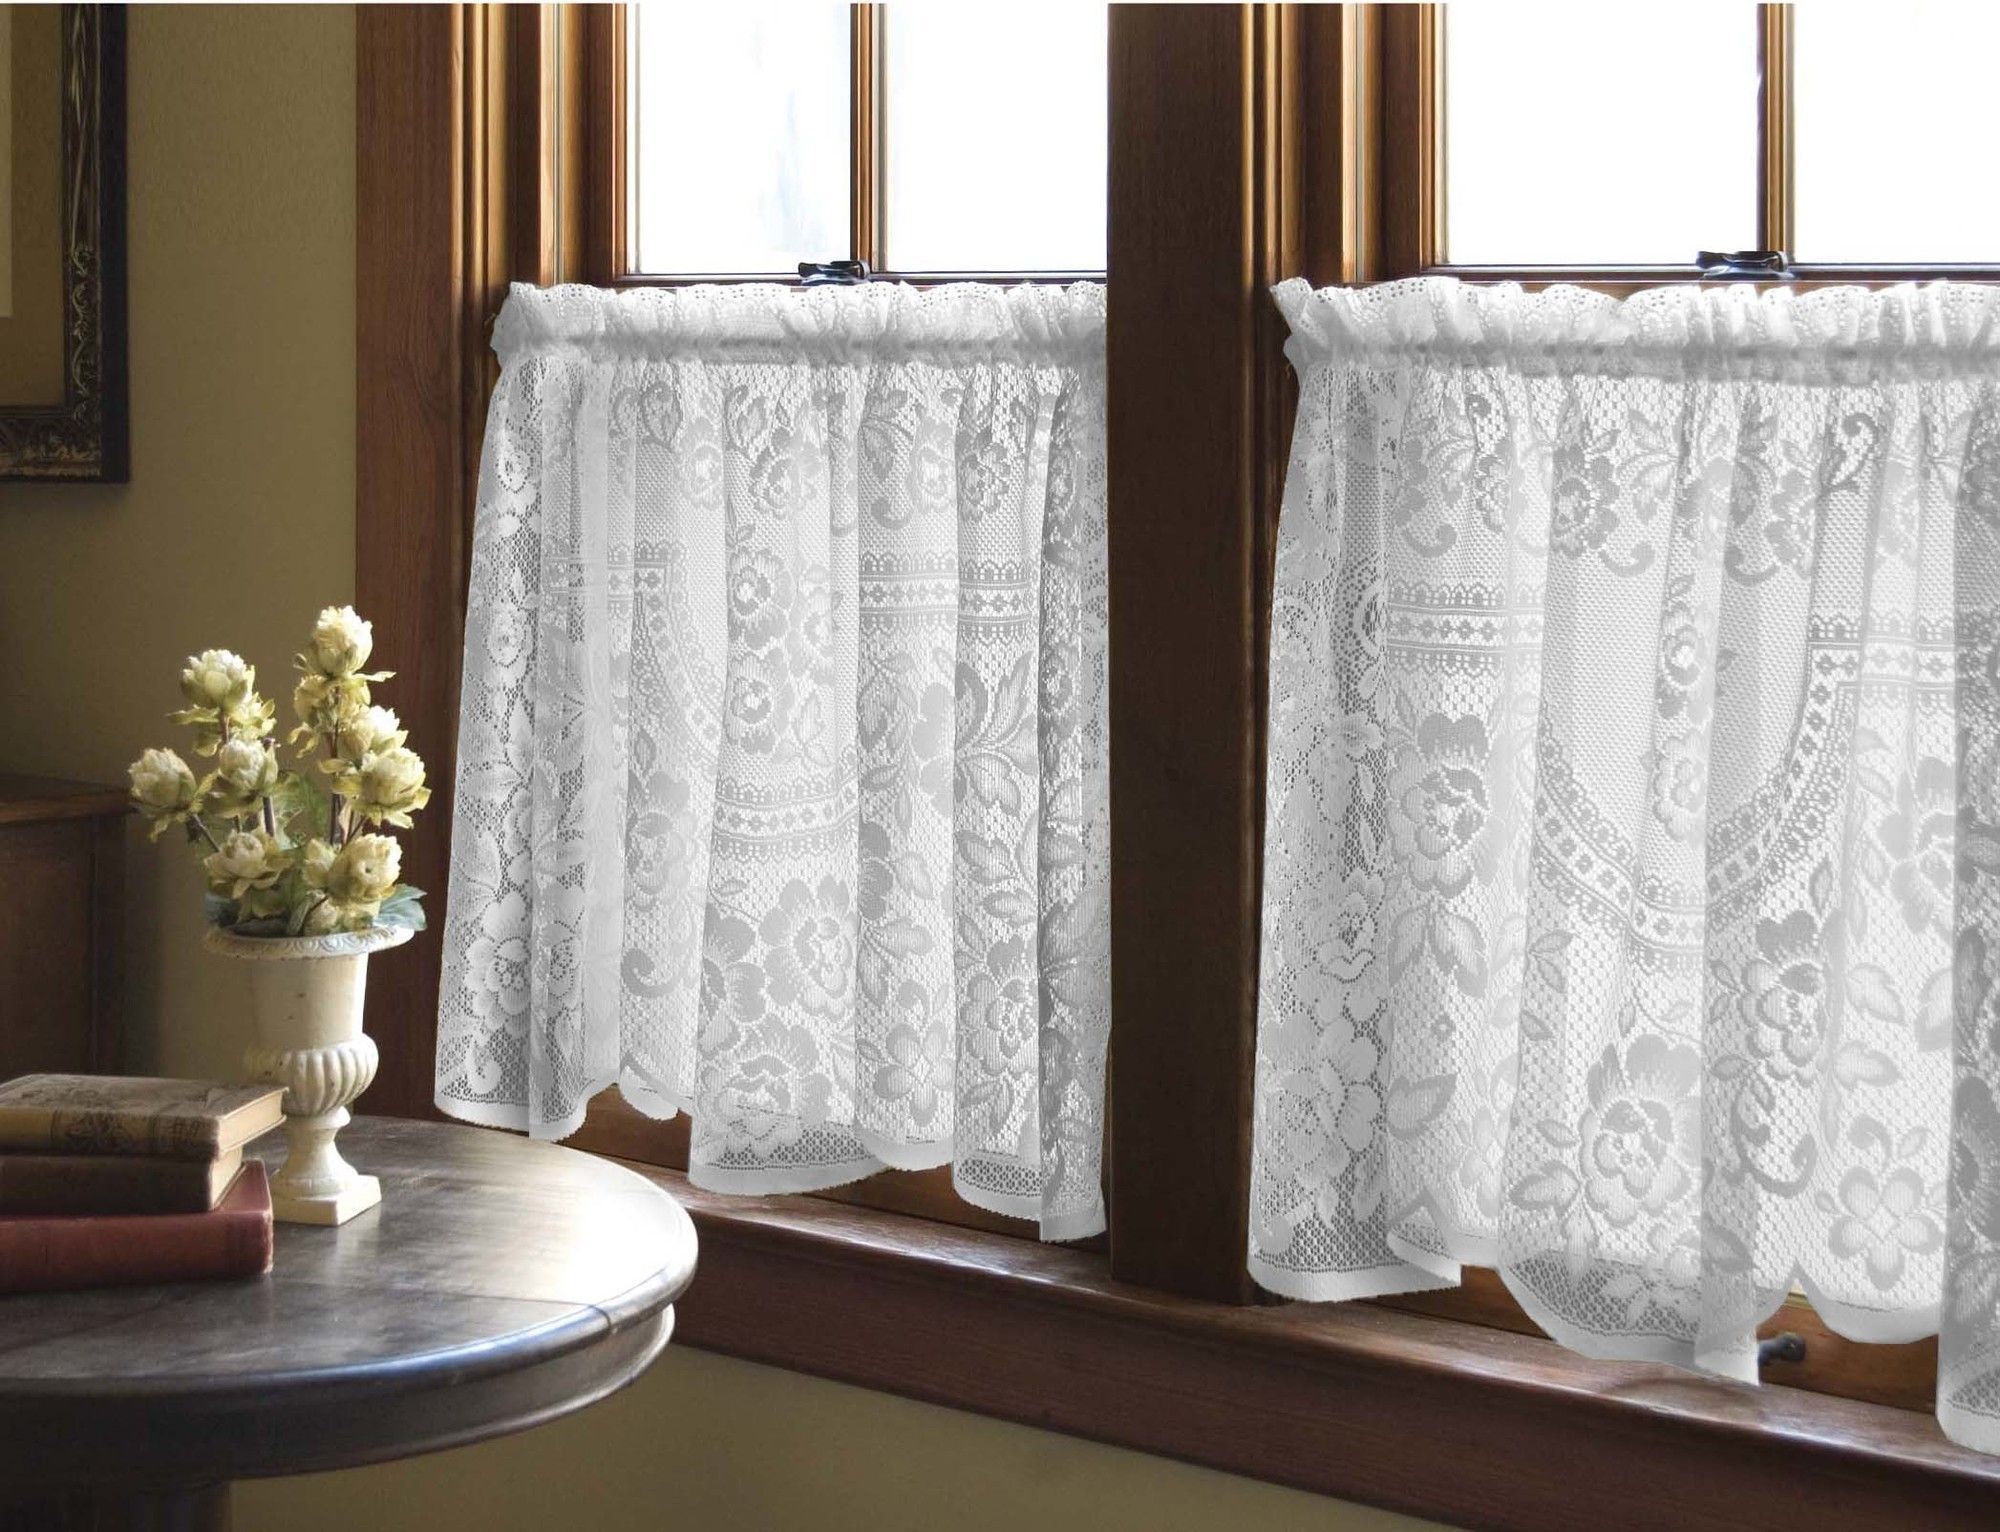 Victorian Rose Tier Curtain | Curtains | Curtains, Victorian Throughout Rod Pocket Cotton Striped Lace Cotton Burlap Kitchen Curtains (View 13 of 20)